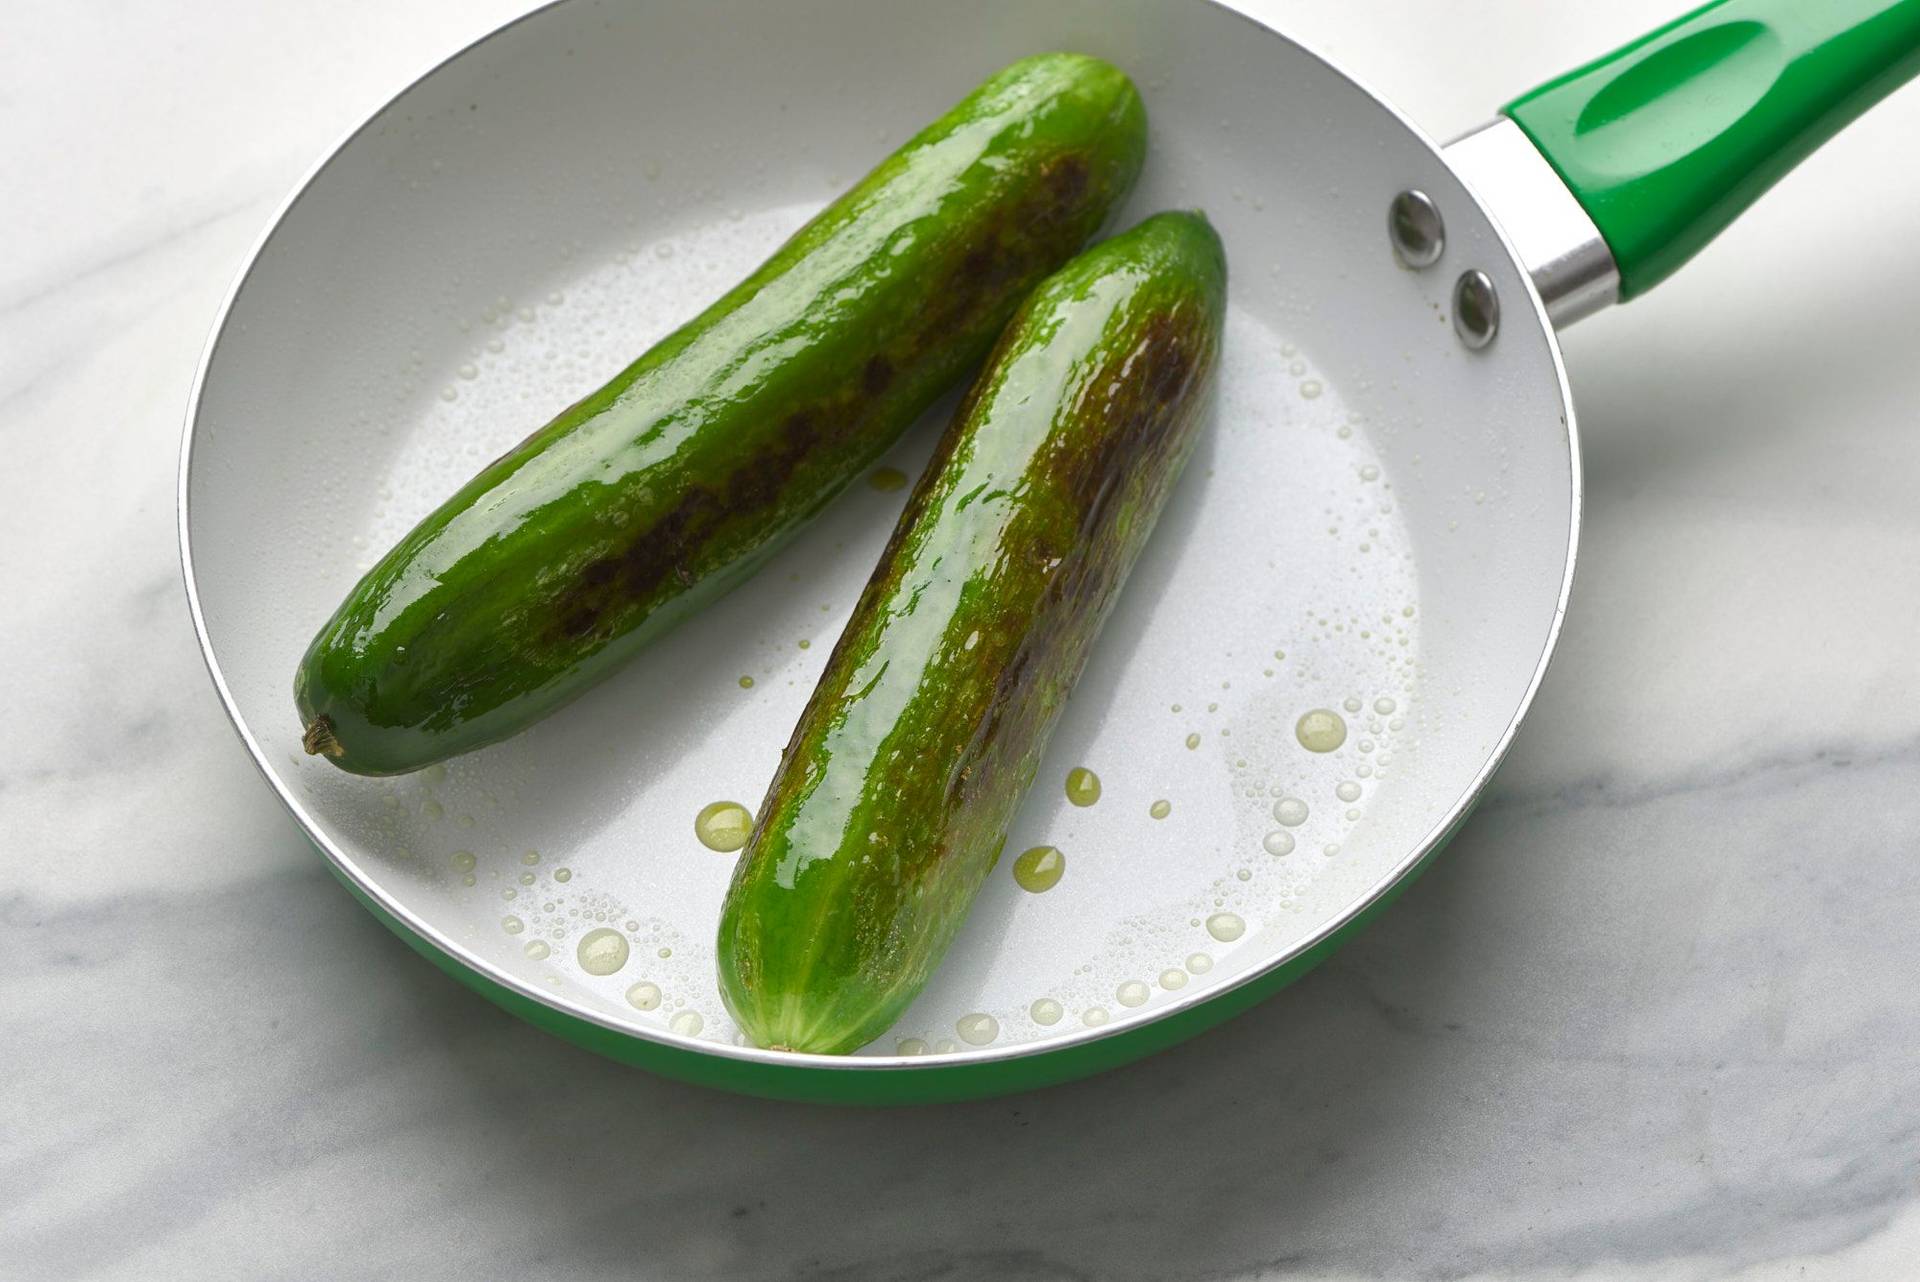 two charred cucumbers in a green pan with a marbled sapienstone top